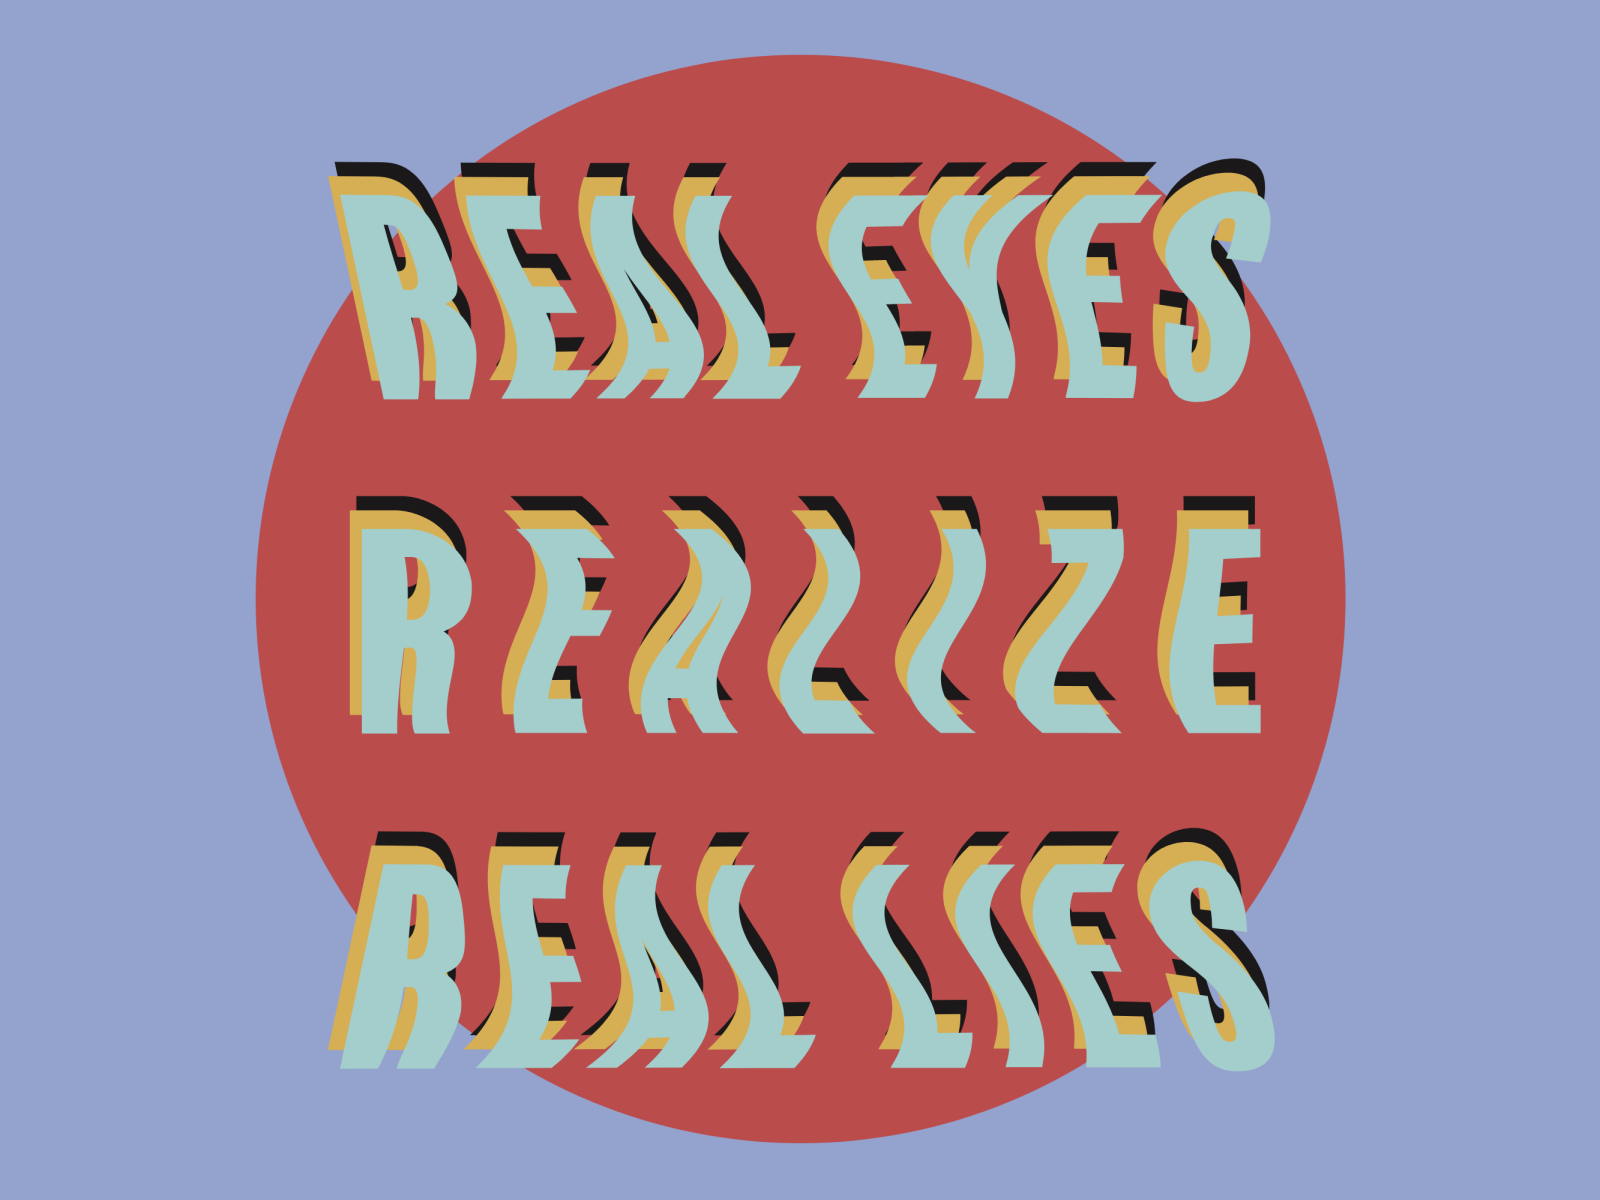 Real Eyes Realize Real Lies by Marissa on Dribbble